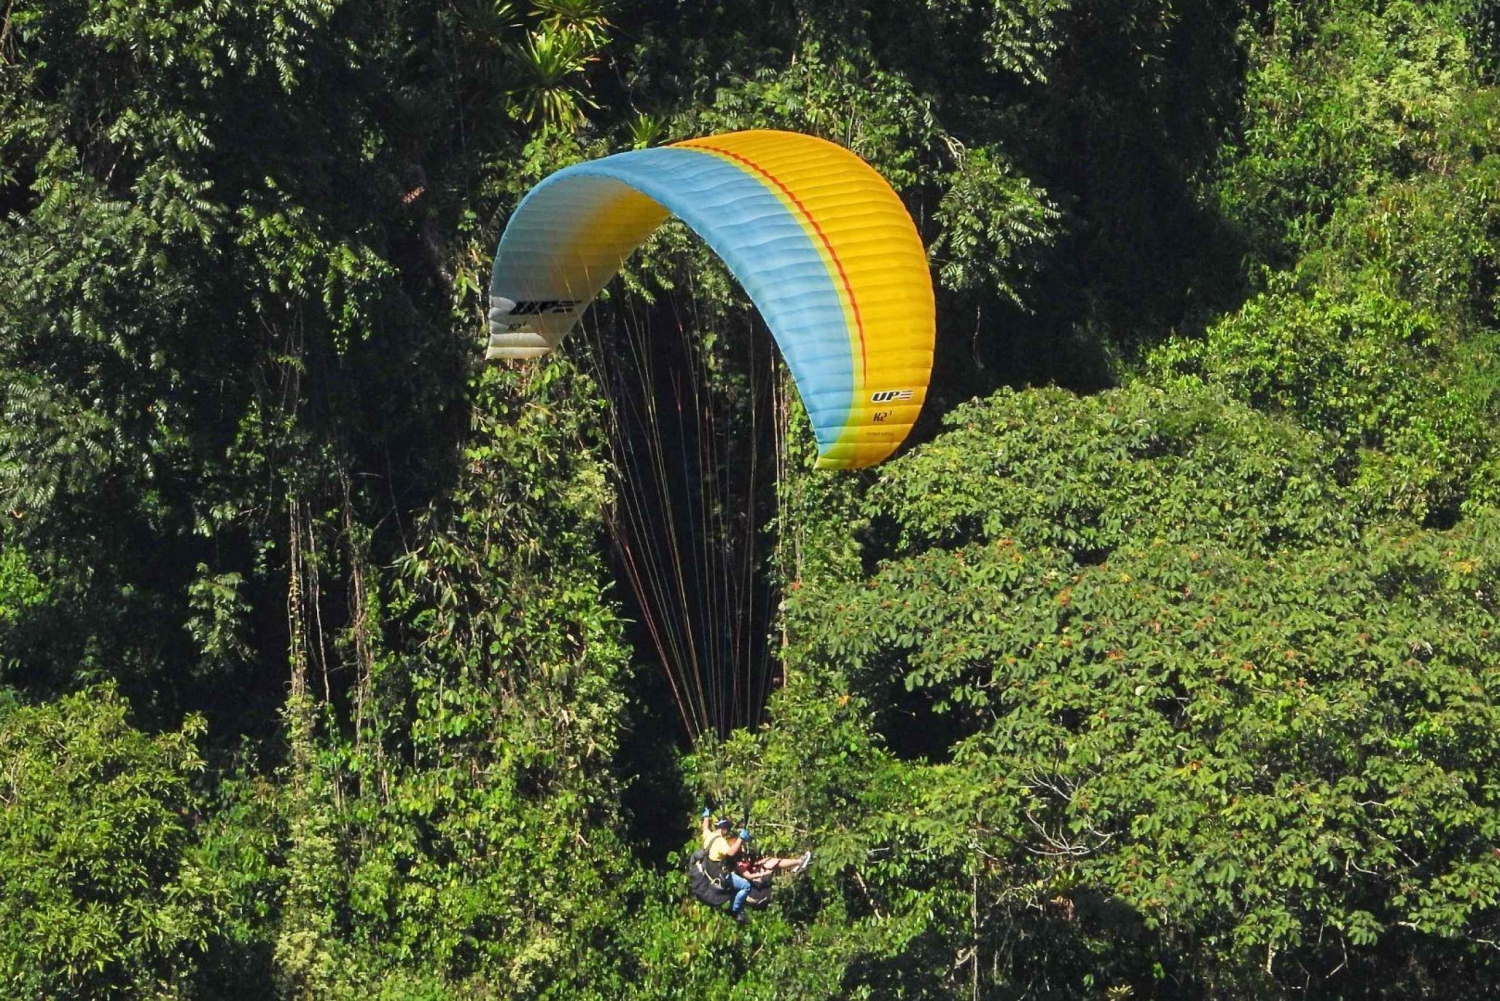 From Guatape: Paragliding over Guacaica Jungle